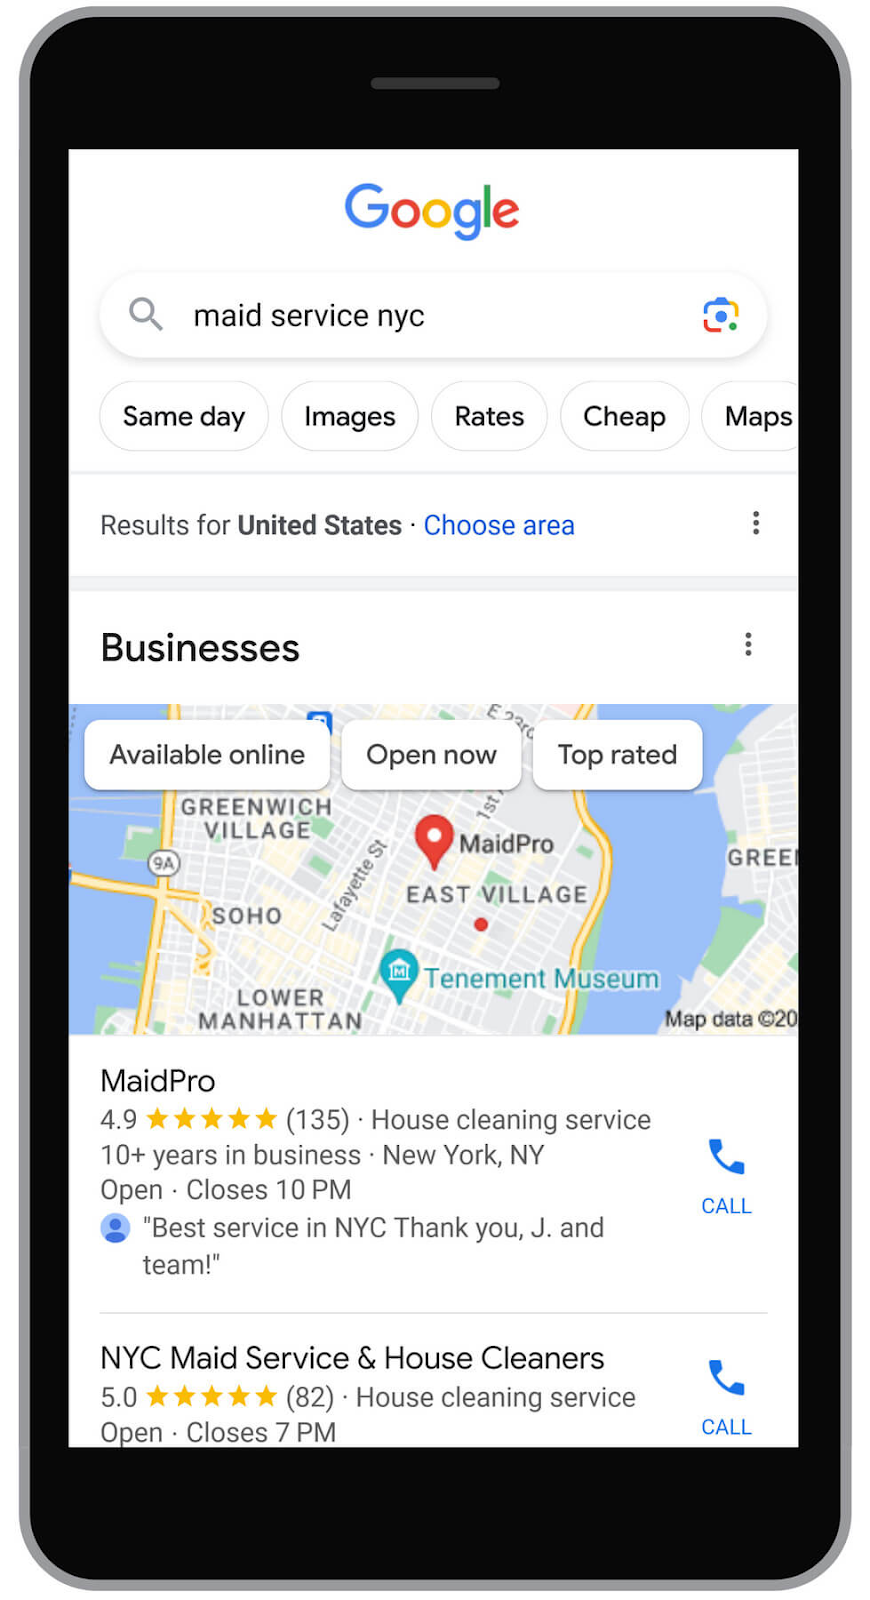 A preview of Google search results for "maid service nyc"